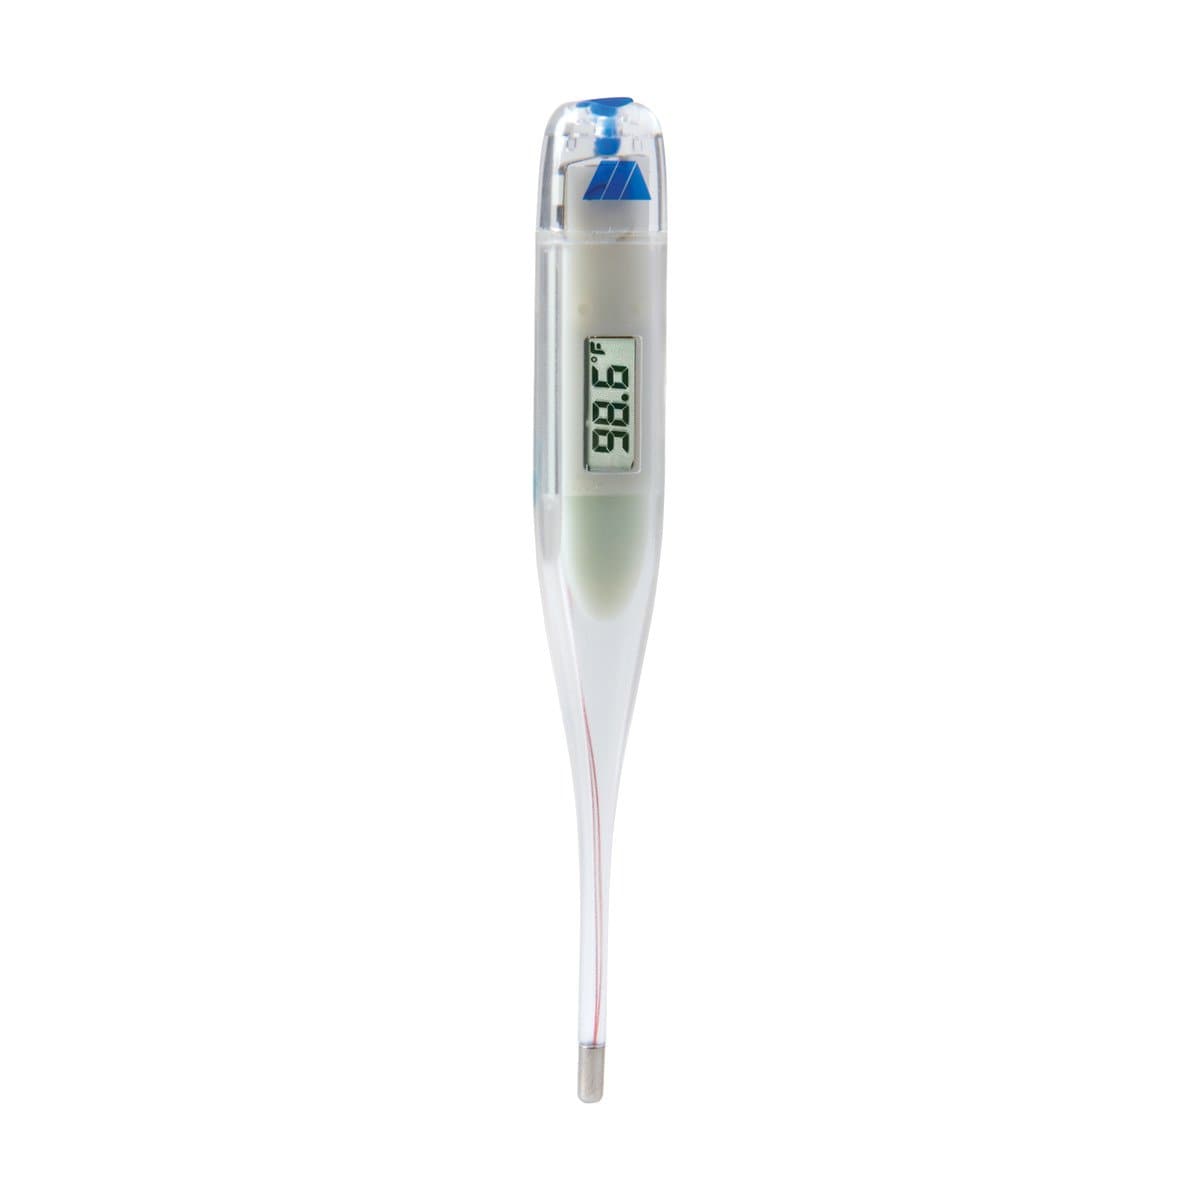 Mabis TinyTemp Digital Thermometer - Clinically Accurate Readings - Senior.com Digital Thermometers